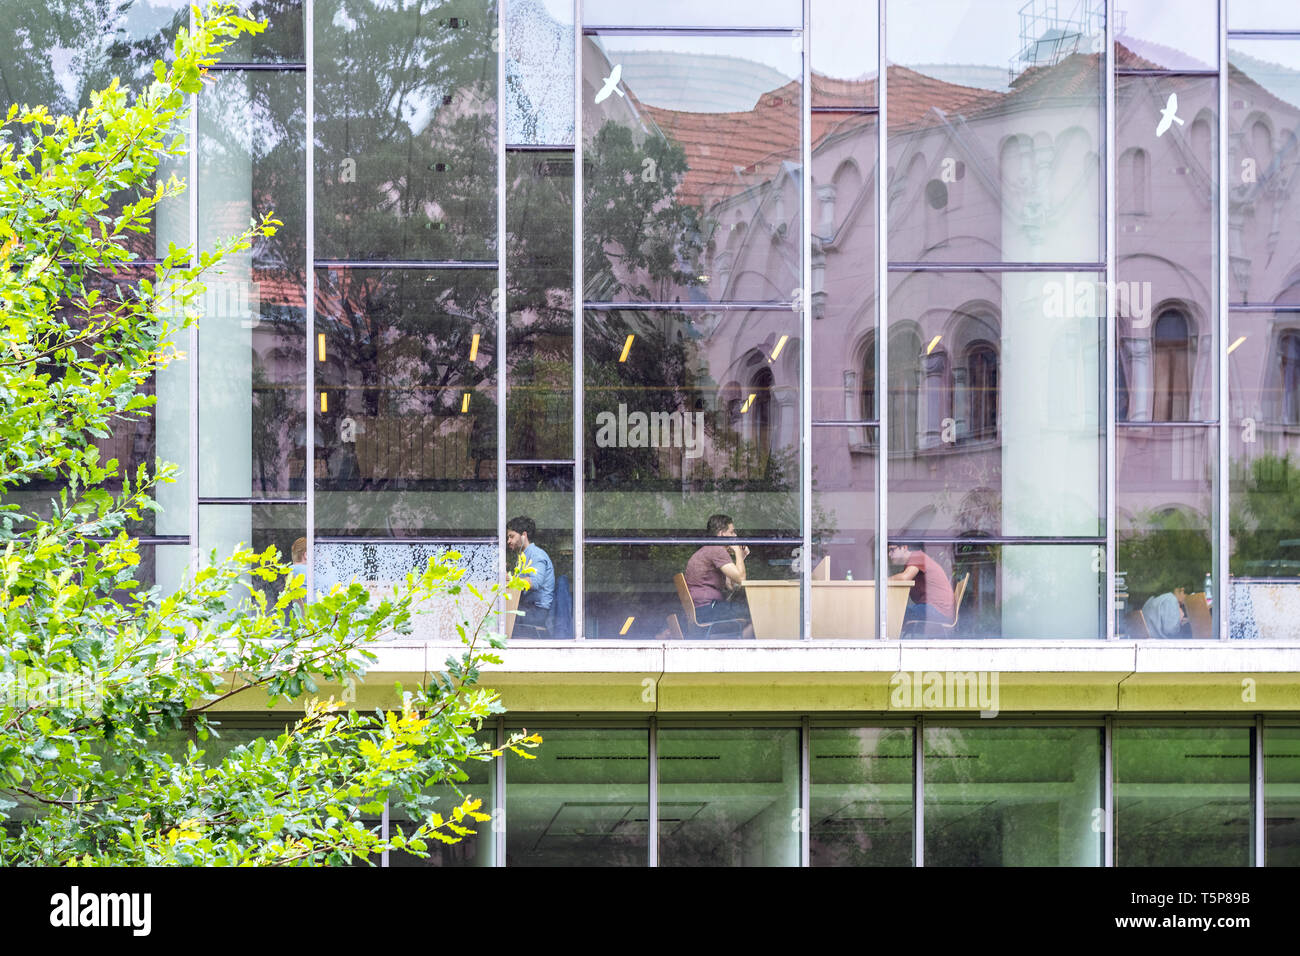 Szeged, Hungary, June 27: Students study at the University library in Szeged, June 27, 2018. Stock Photo